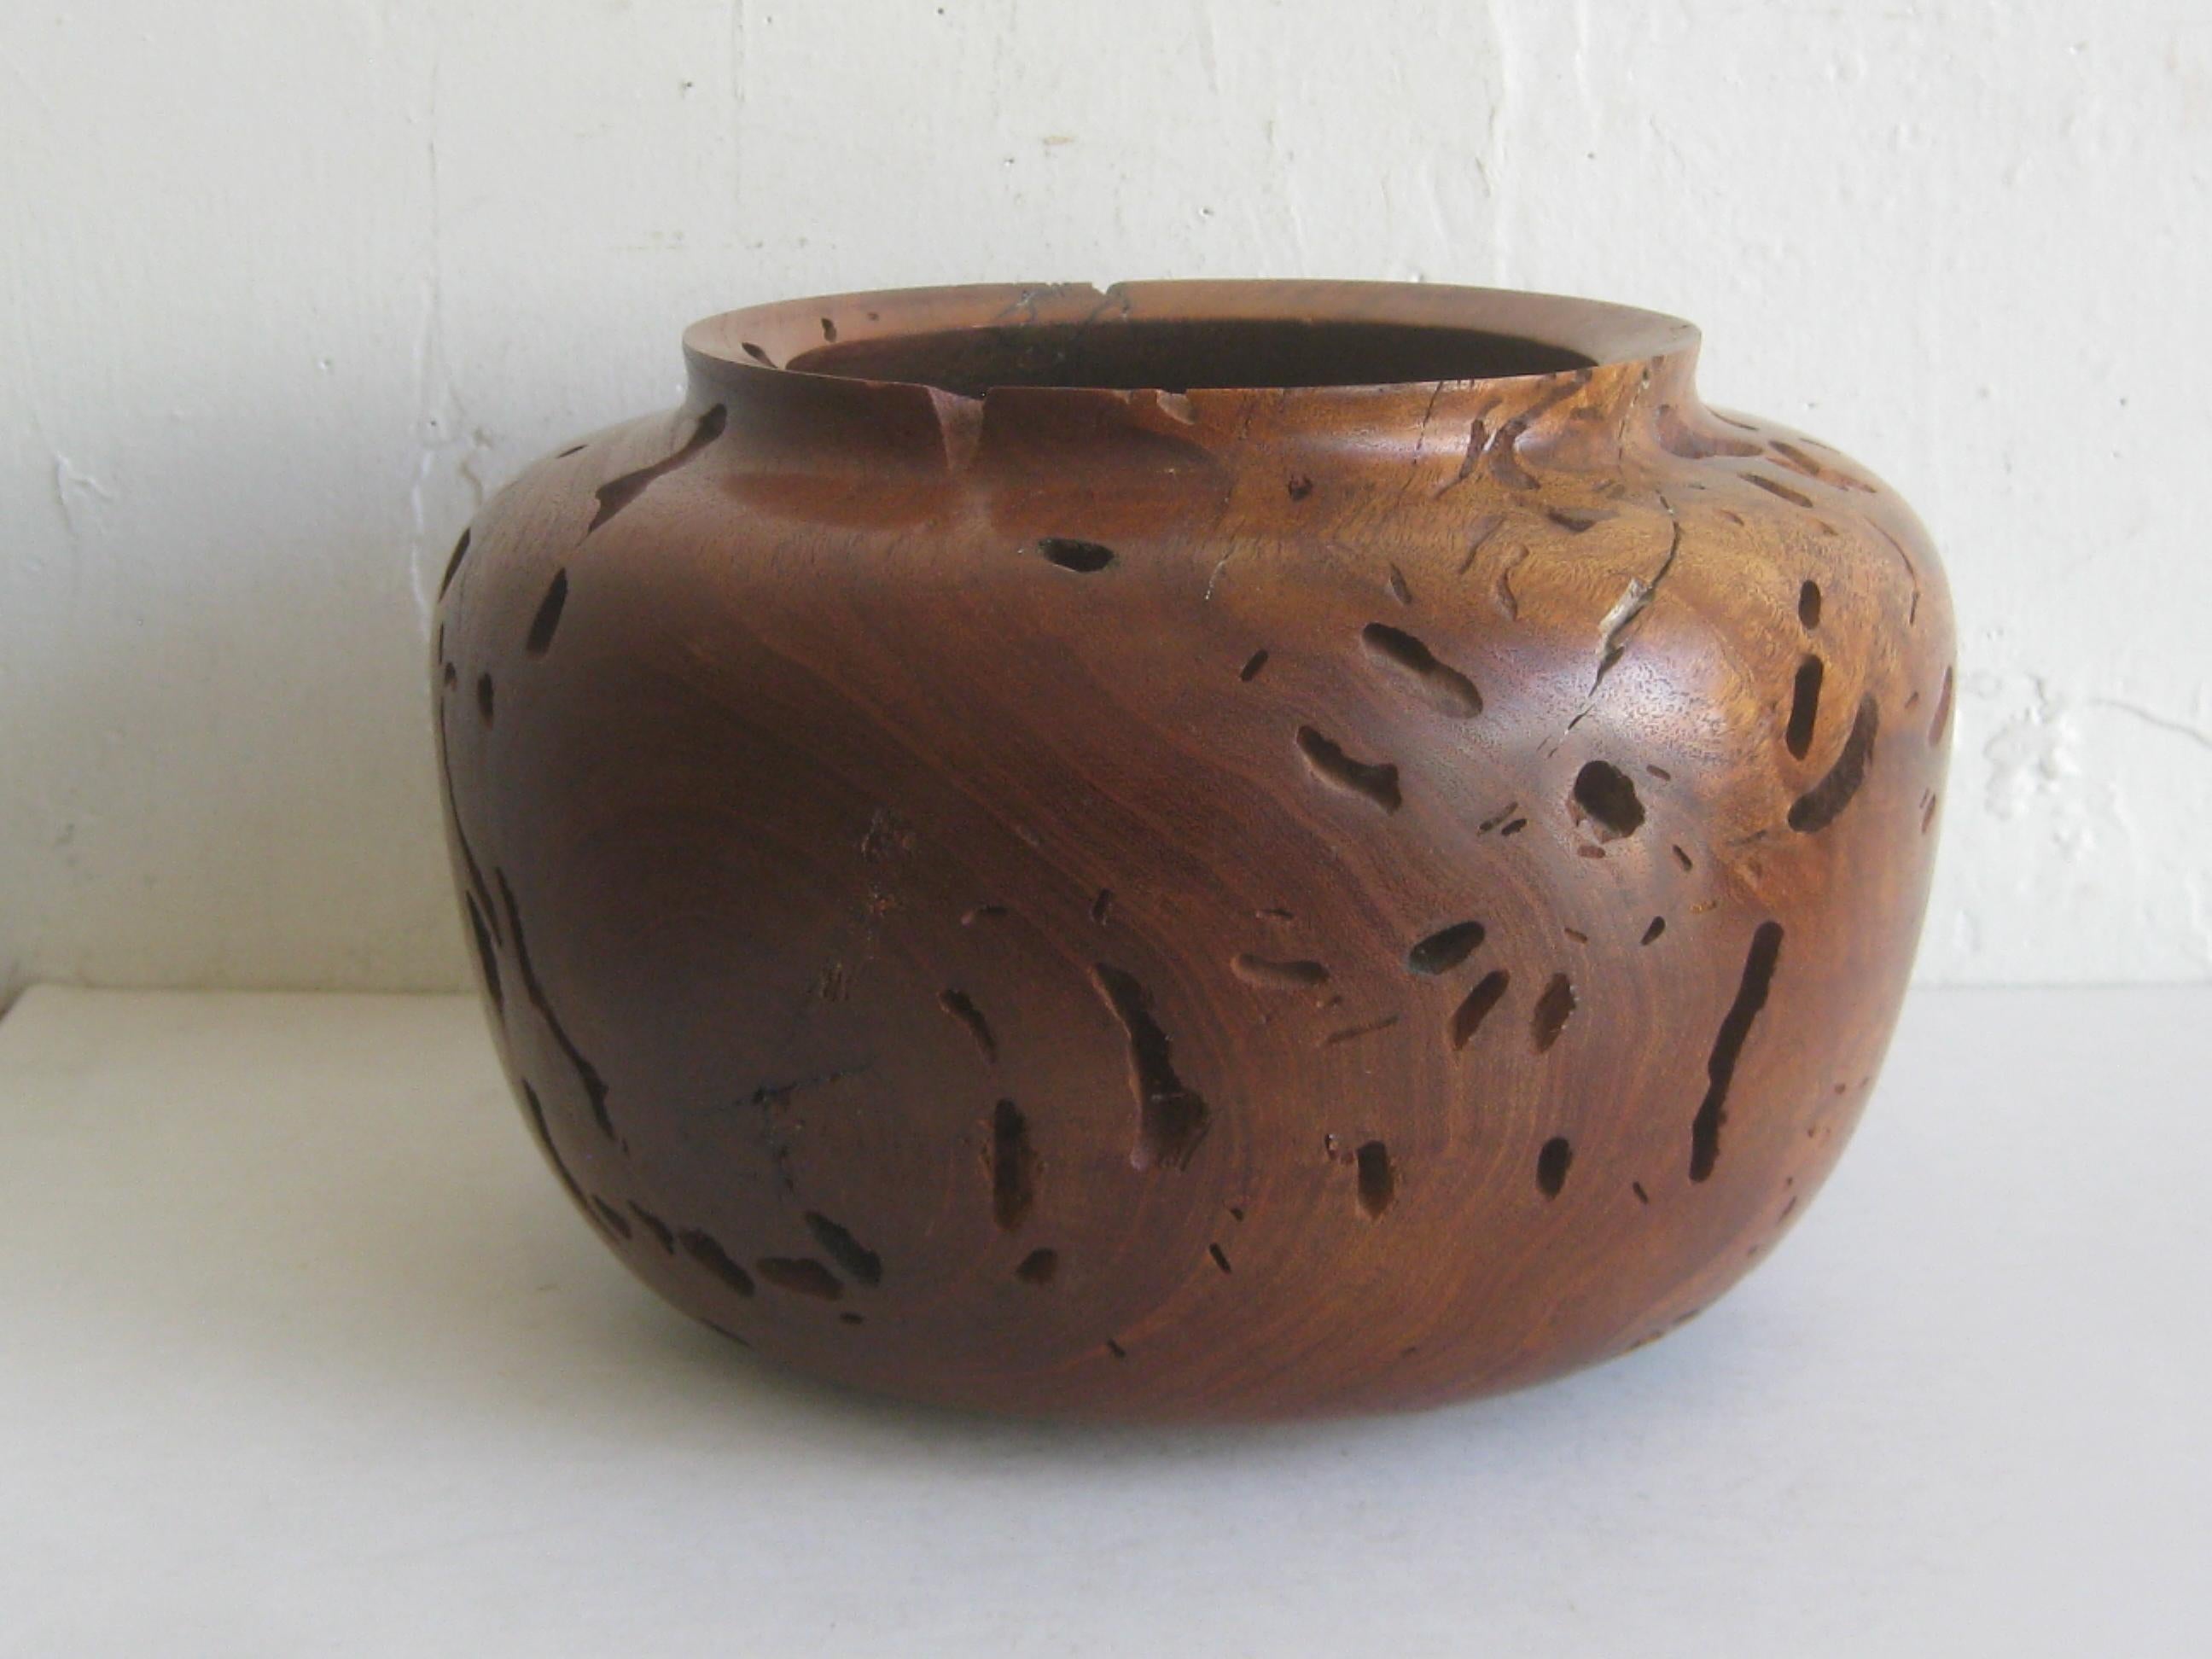 Statement piece! beautiful freeform mesquite wood live edge organic centerpiece bowl by artist Norman Harrison. Signed and dated from 2003 on the bottom. Made in Yuma, Arizona. Wonderful color and form. Measures 9 1/2